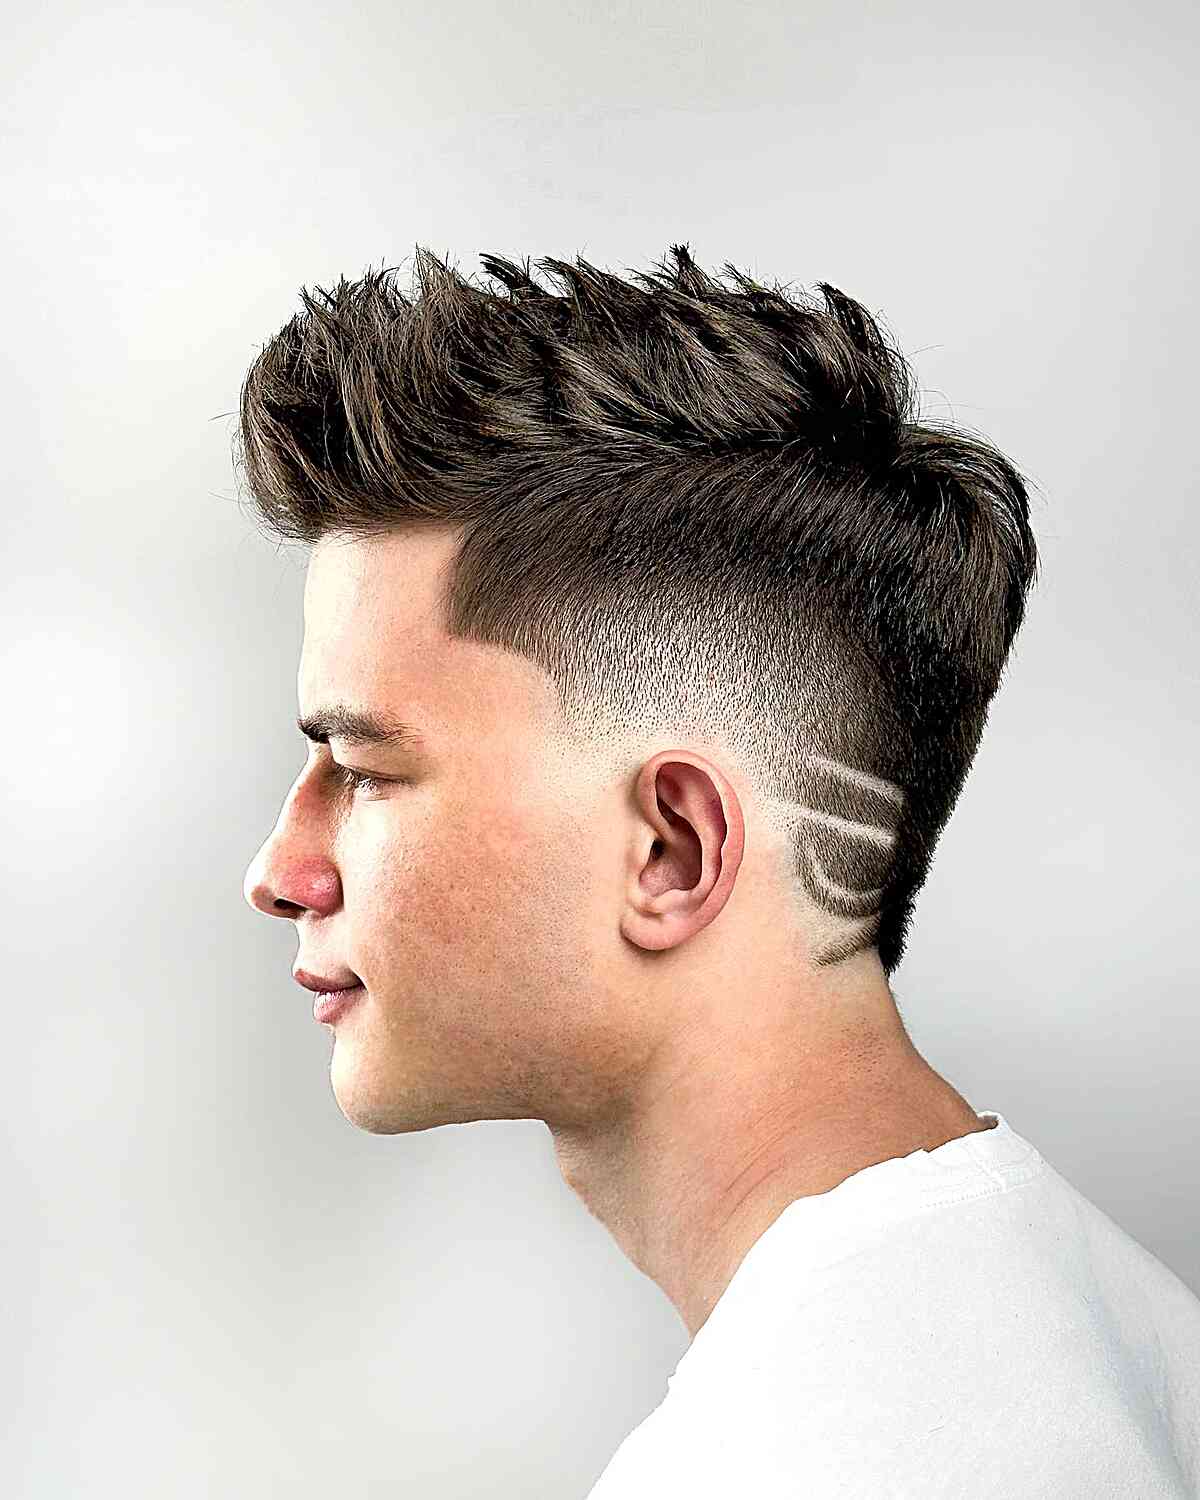 Intricate Hair Designs with a Spiky Fohawk for Men